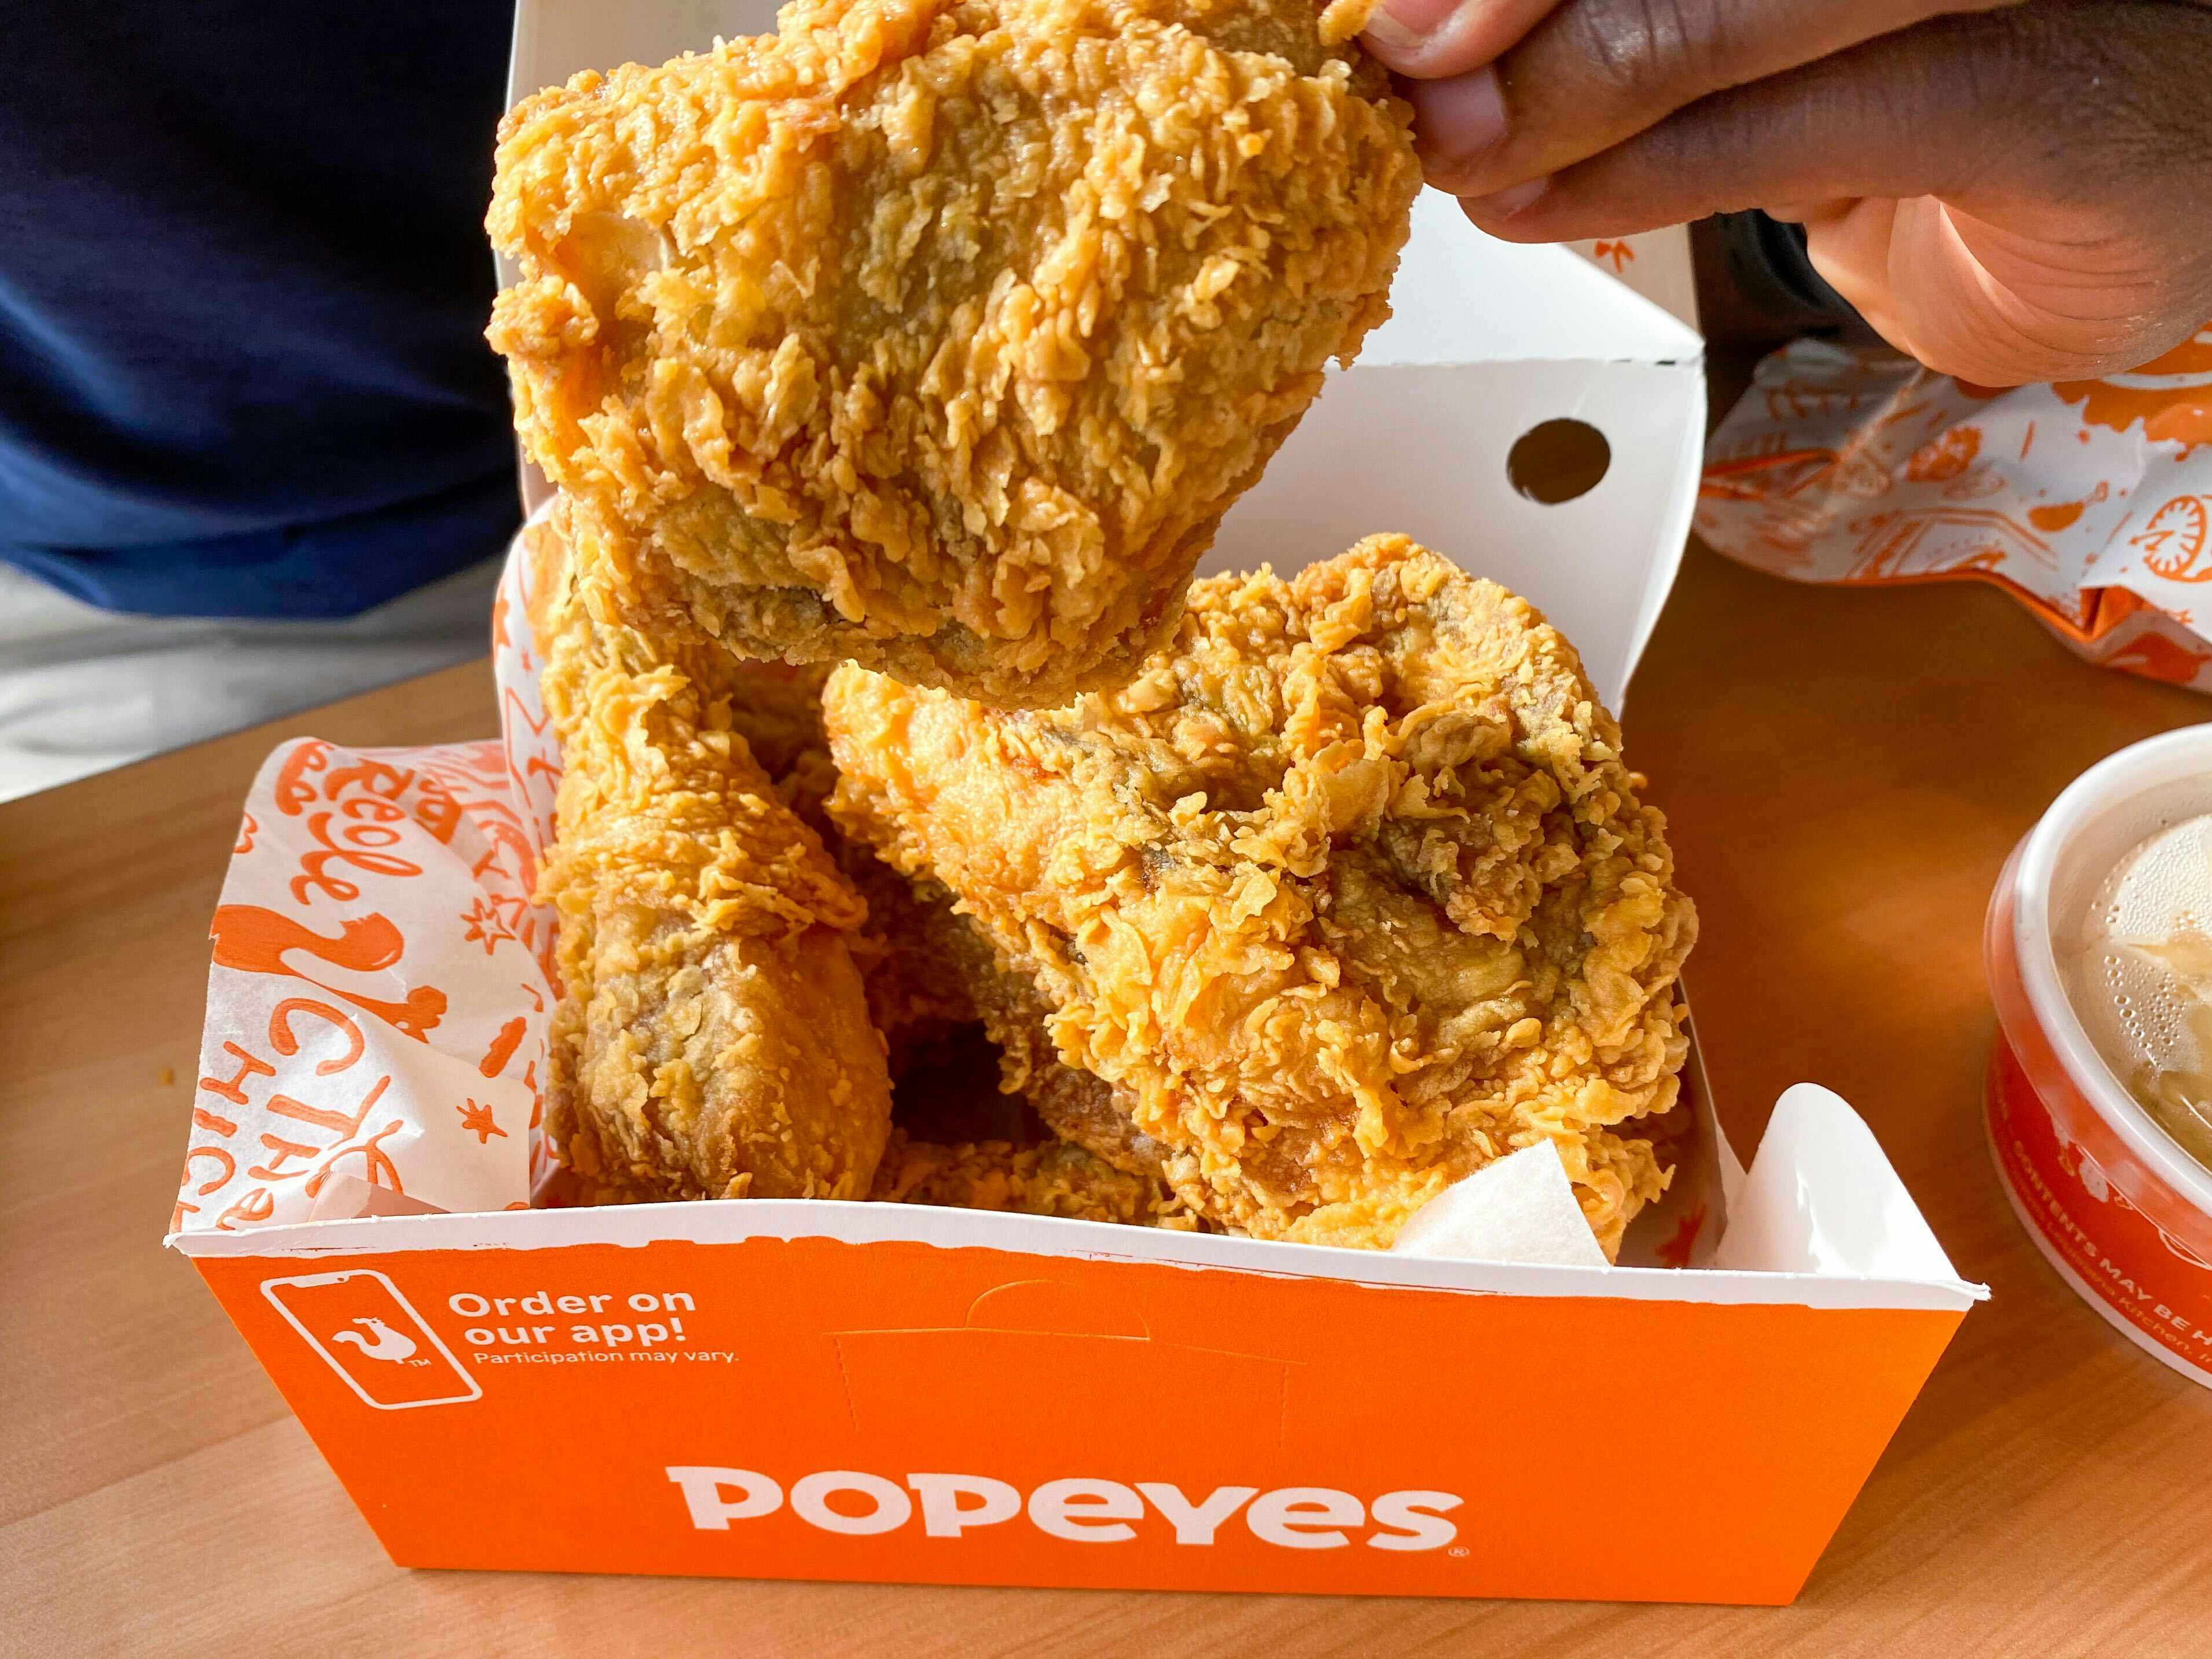 A person's hand taking a piece of chicken out of a box of Popeyes chicken sitting on a table.